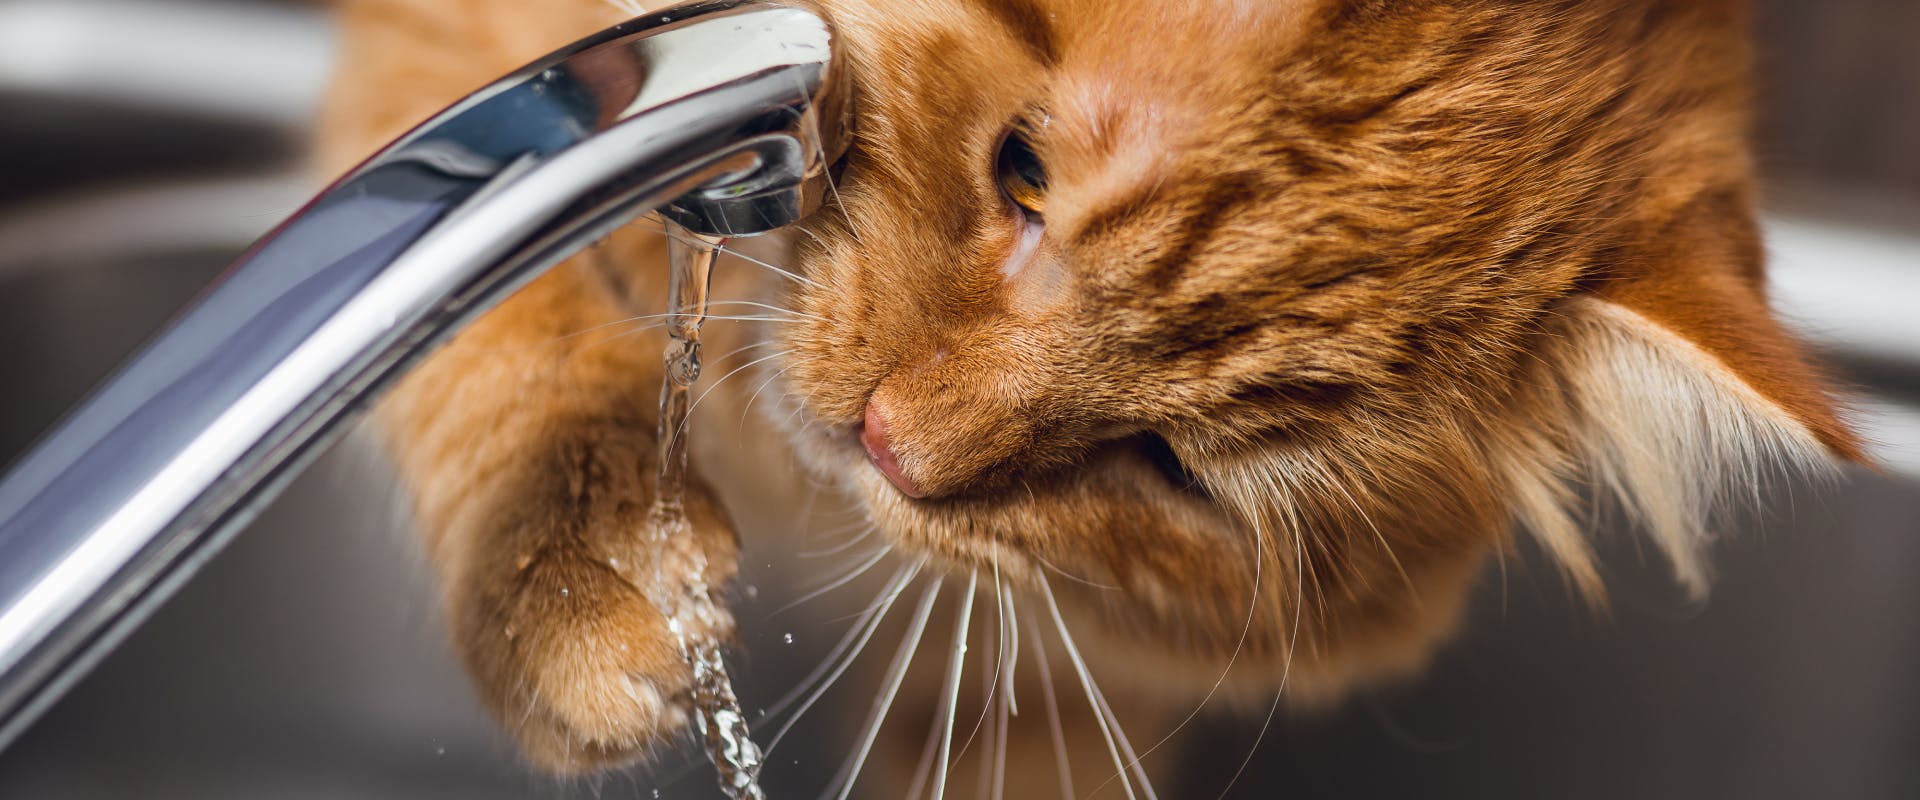 a cat using its paw to touch water coming out of a tap